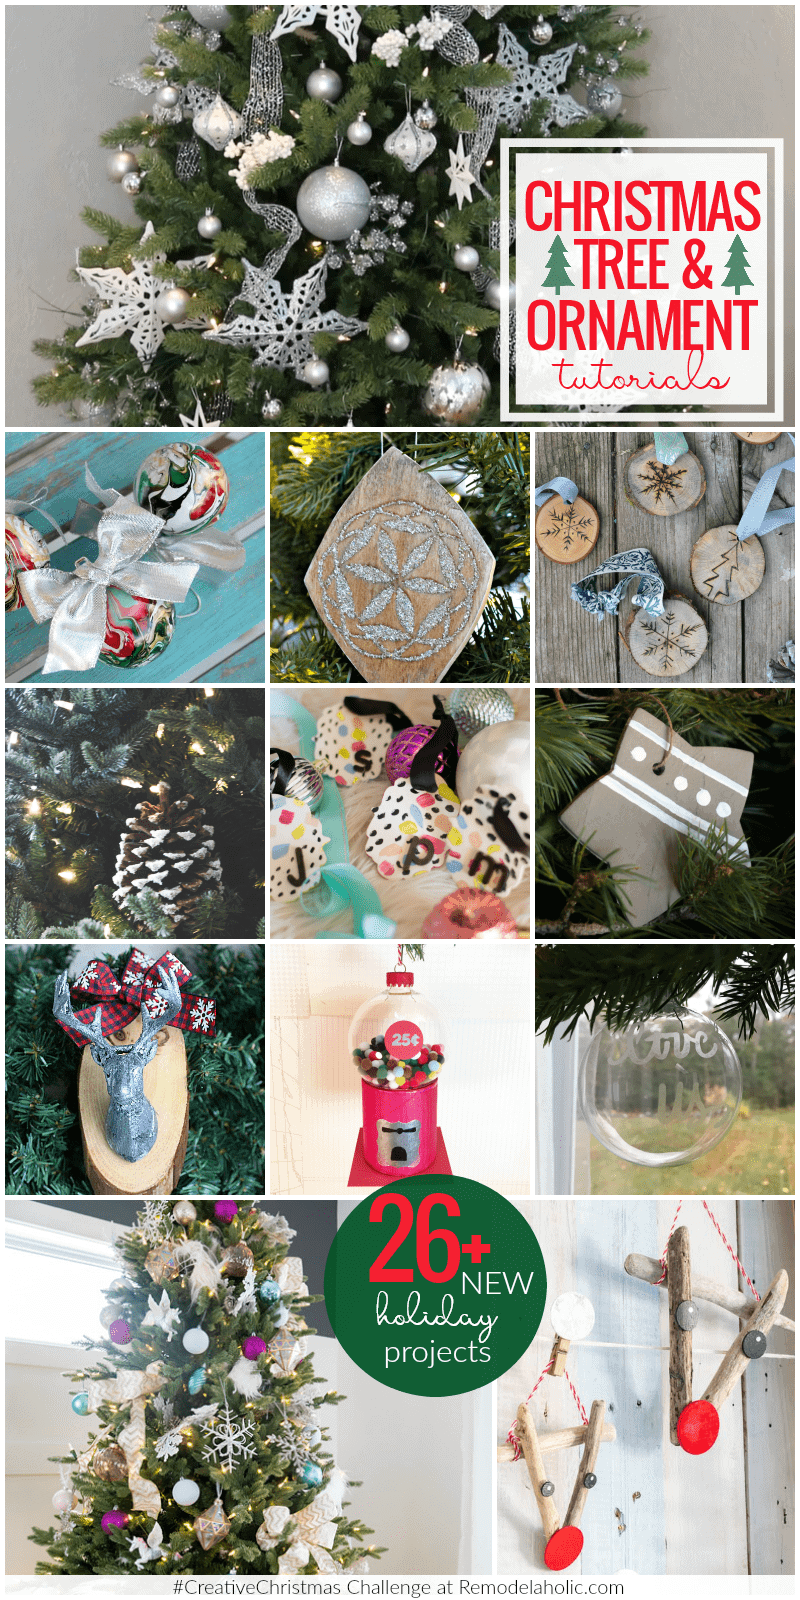 Who's looking for simple Christmas DIY projects? The #CreativeChristmas series on Remodelaholic, where there will be so many project tutorials and ideas, plus the week-long link party for any and all Christmas projects has begun!